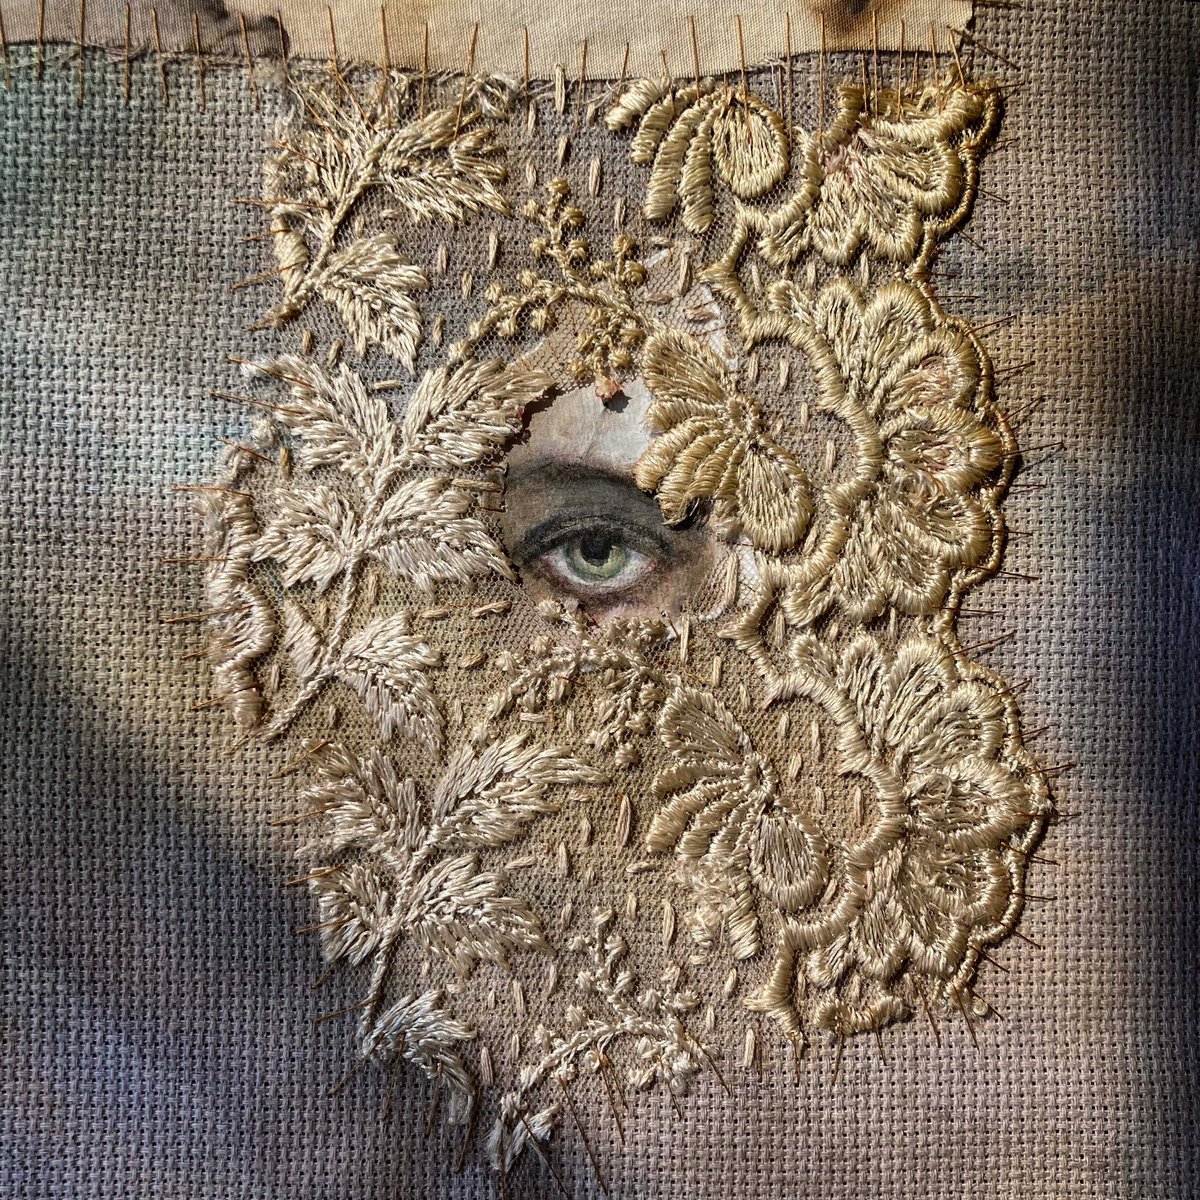 The central detail of a mixed media collage I’m working on at the moment. .. #eyepainting #gouachepainting #lacestitch #teadye #simpleembroidery #abstractart #eyeportrait #paintedfabric #slowstitching #mixedmediatextiles